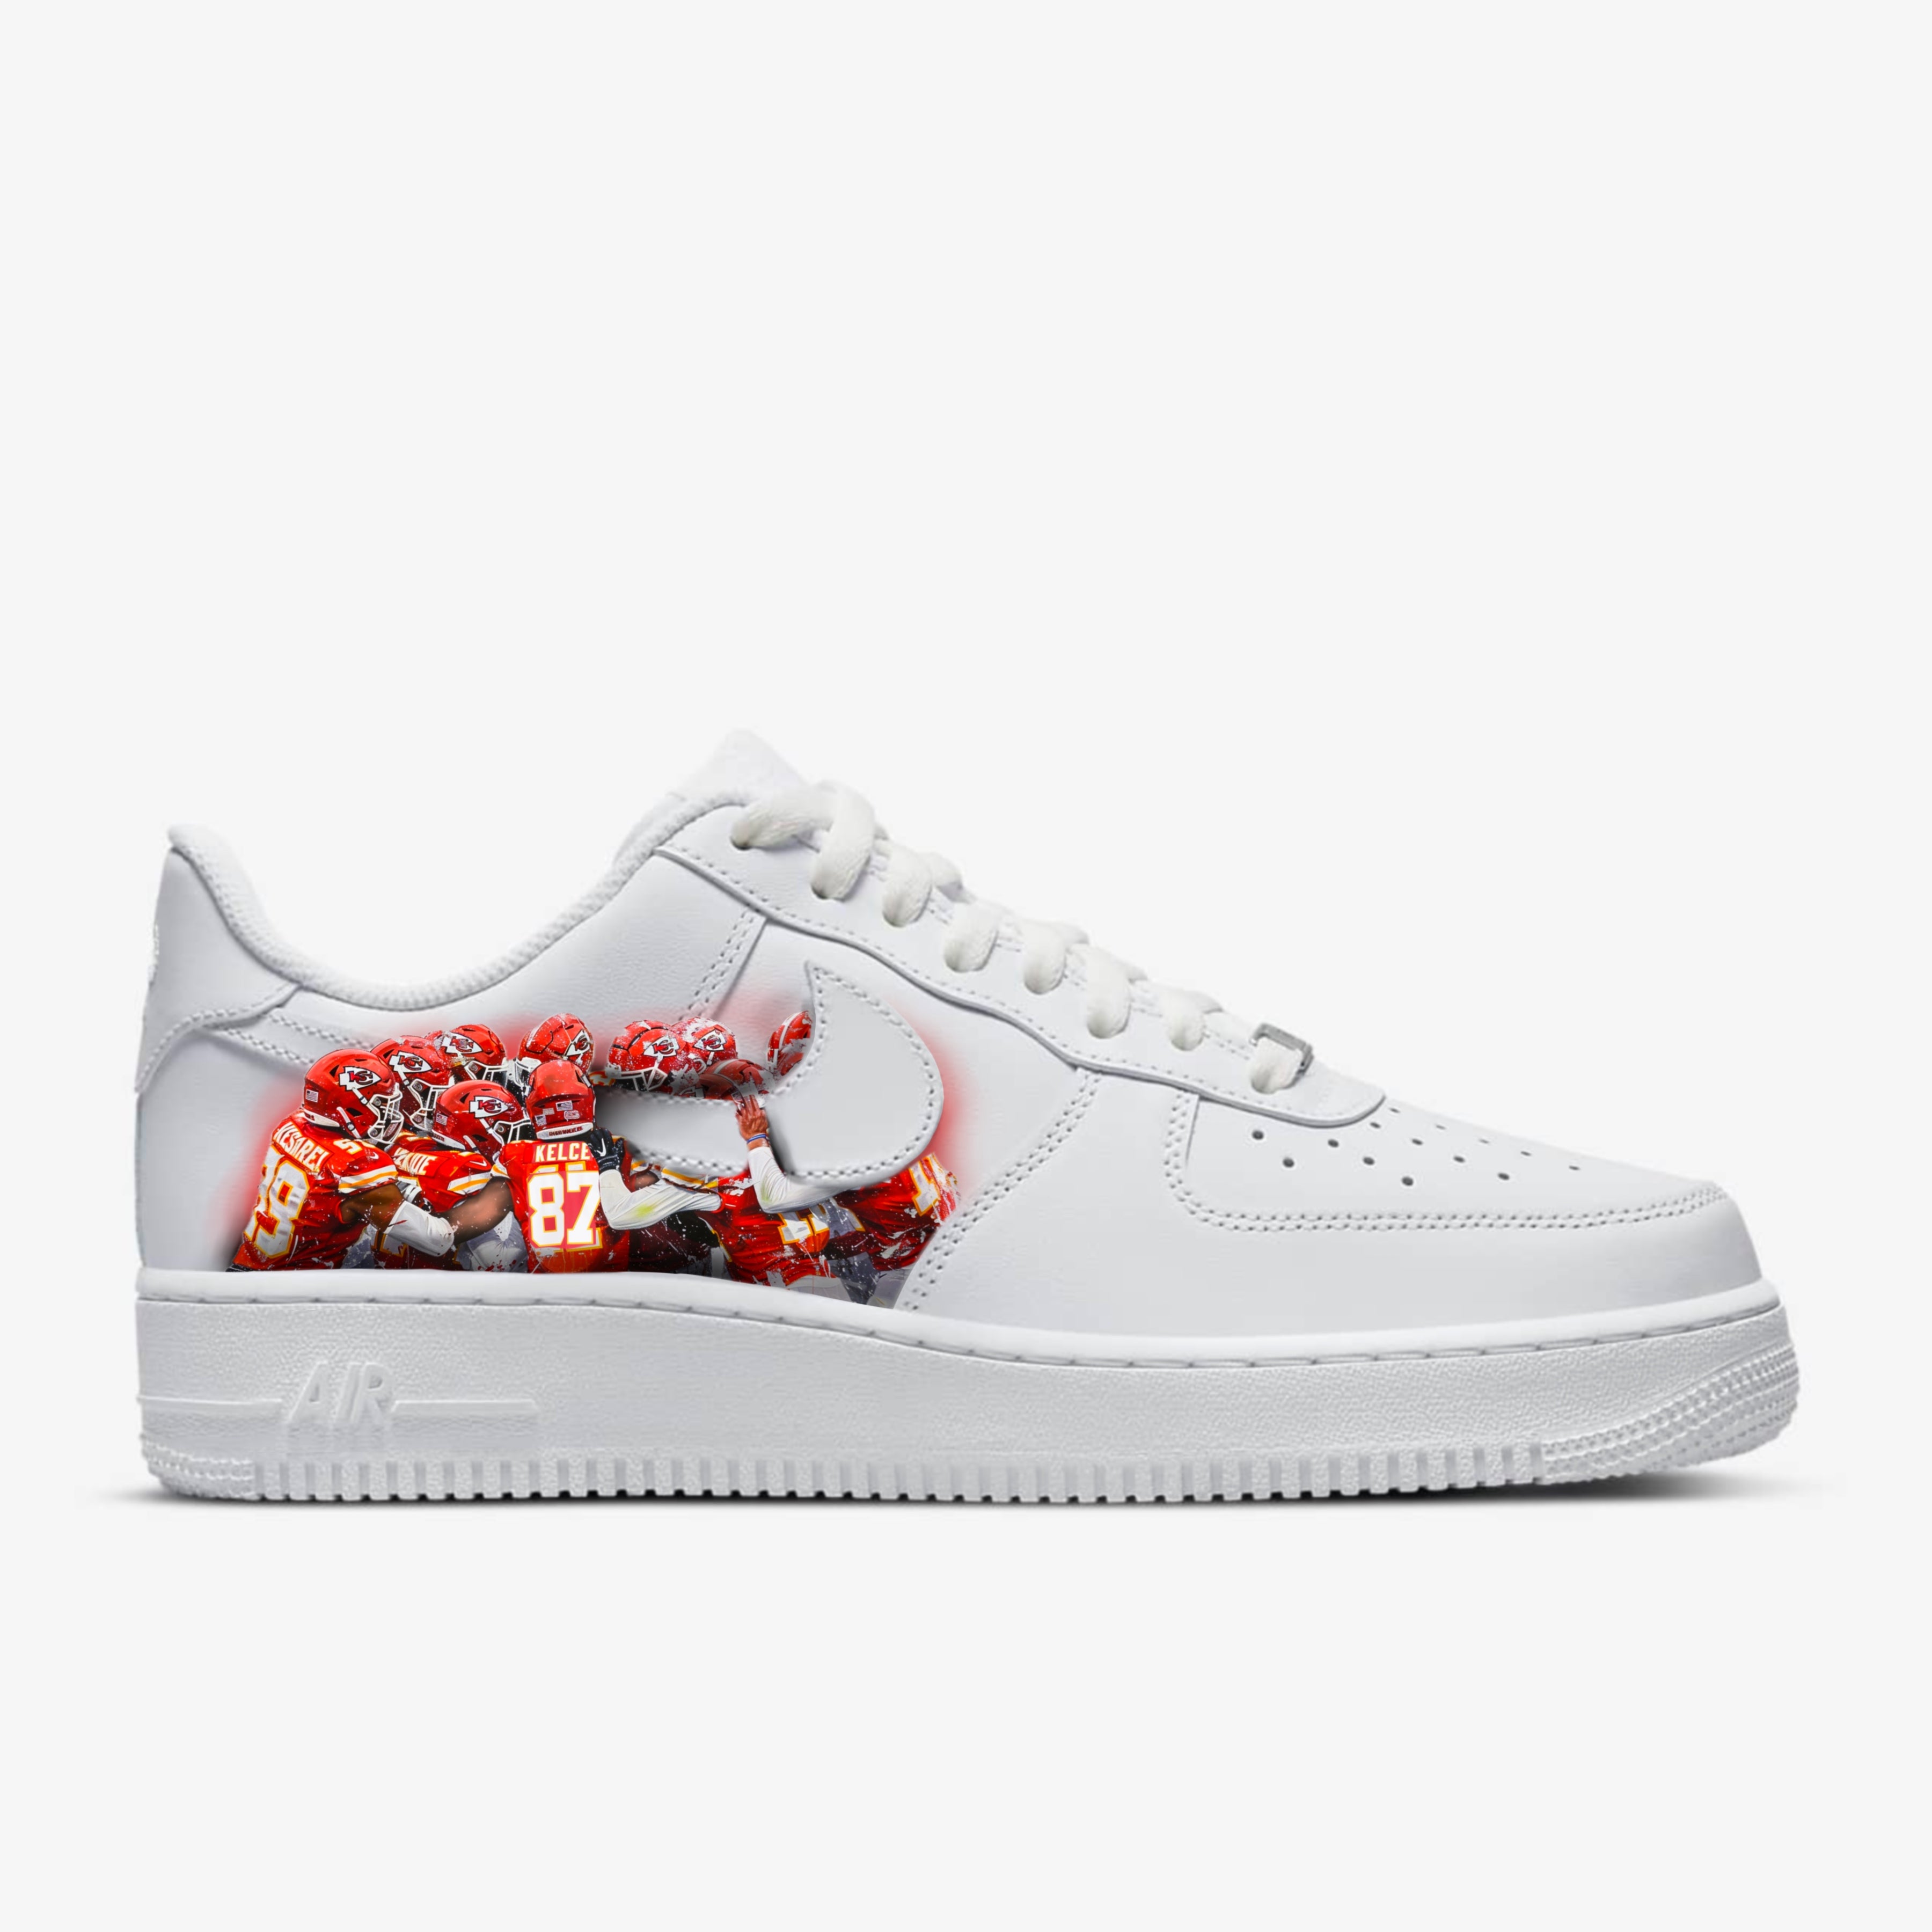 Championship Chiefs: Limited Edition AF1